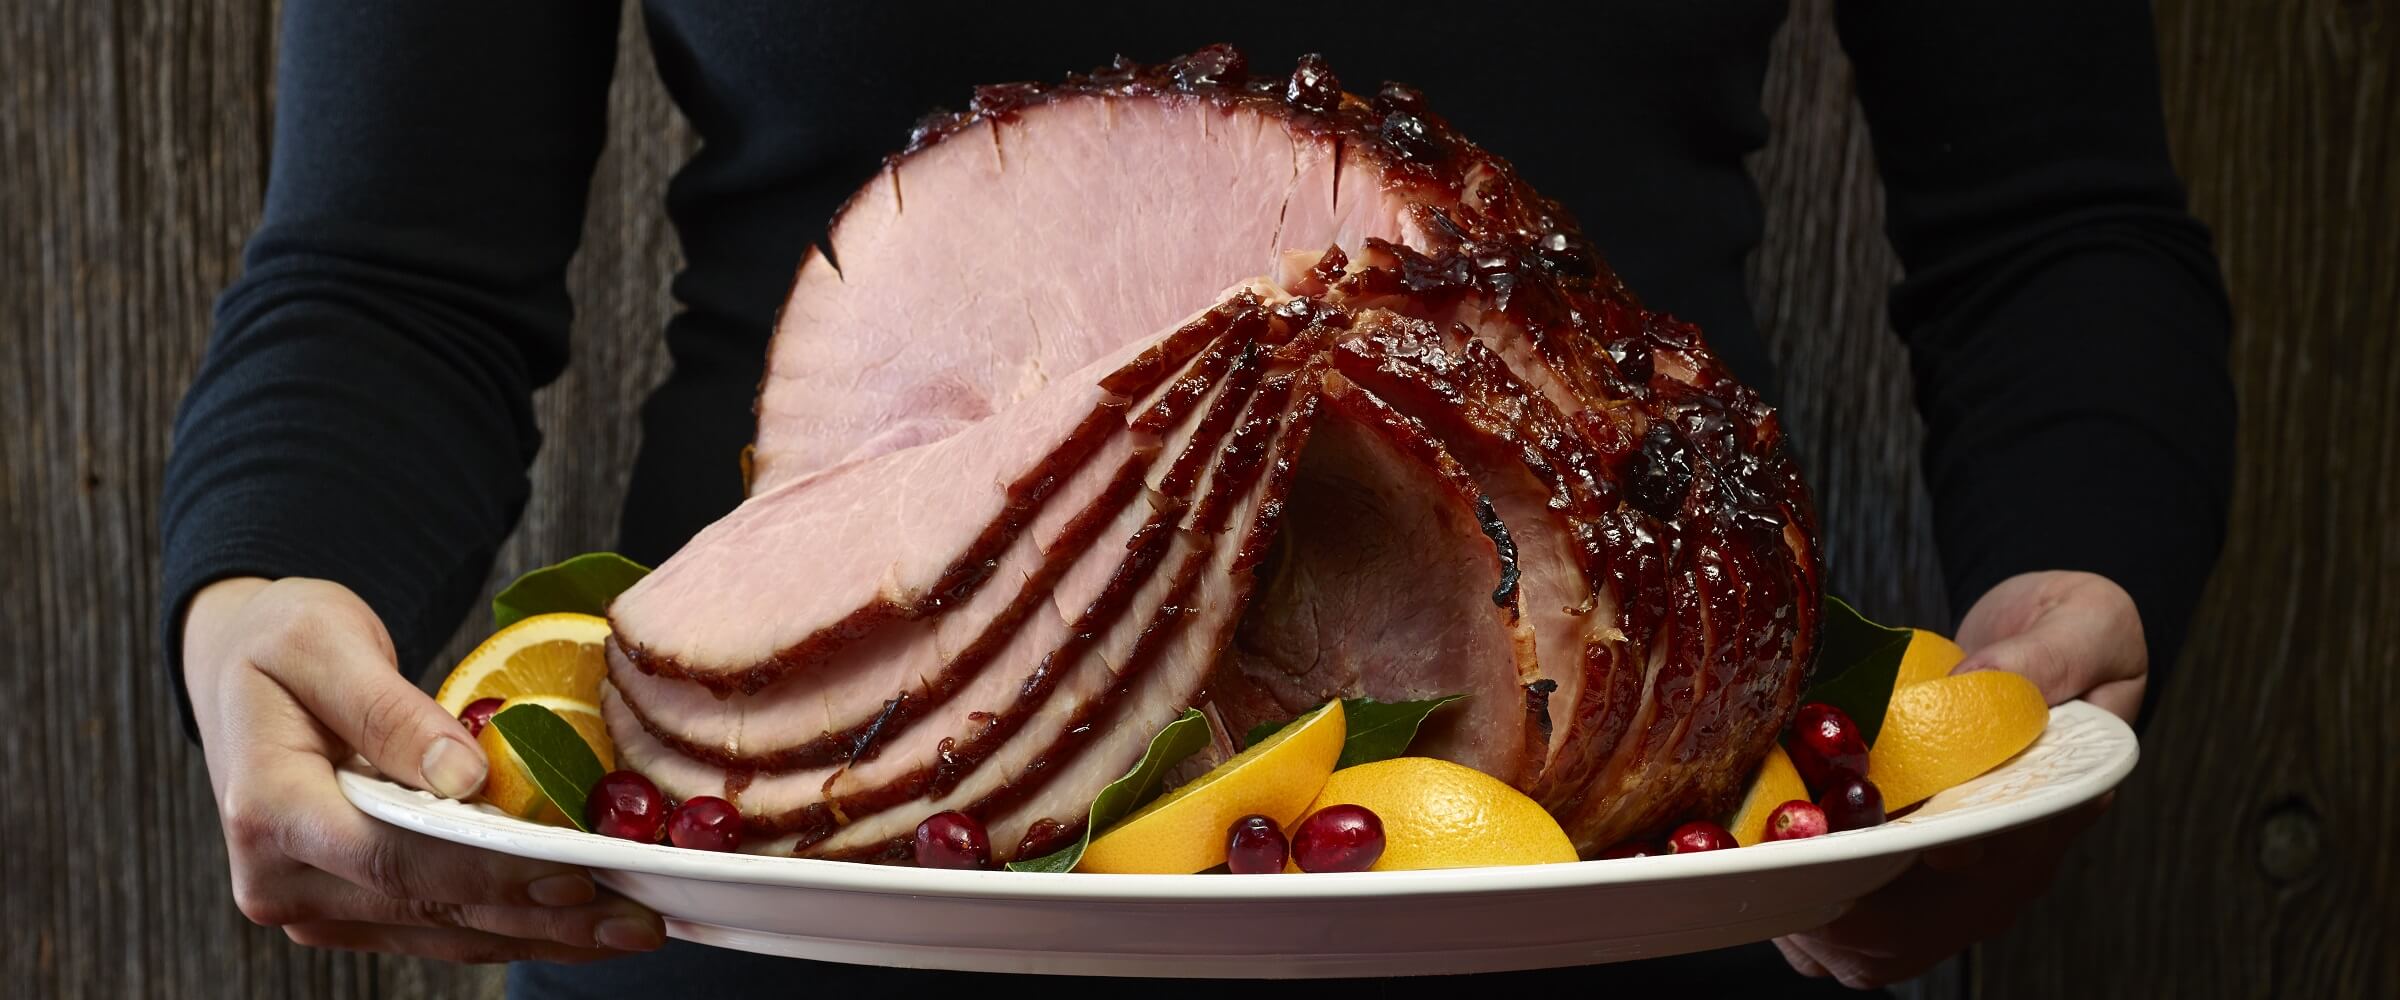 Person in black shirt hold platter with sliced Cranberry glazed ham with orange wedges